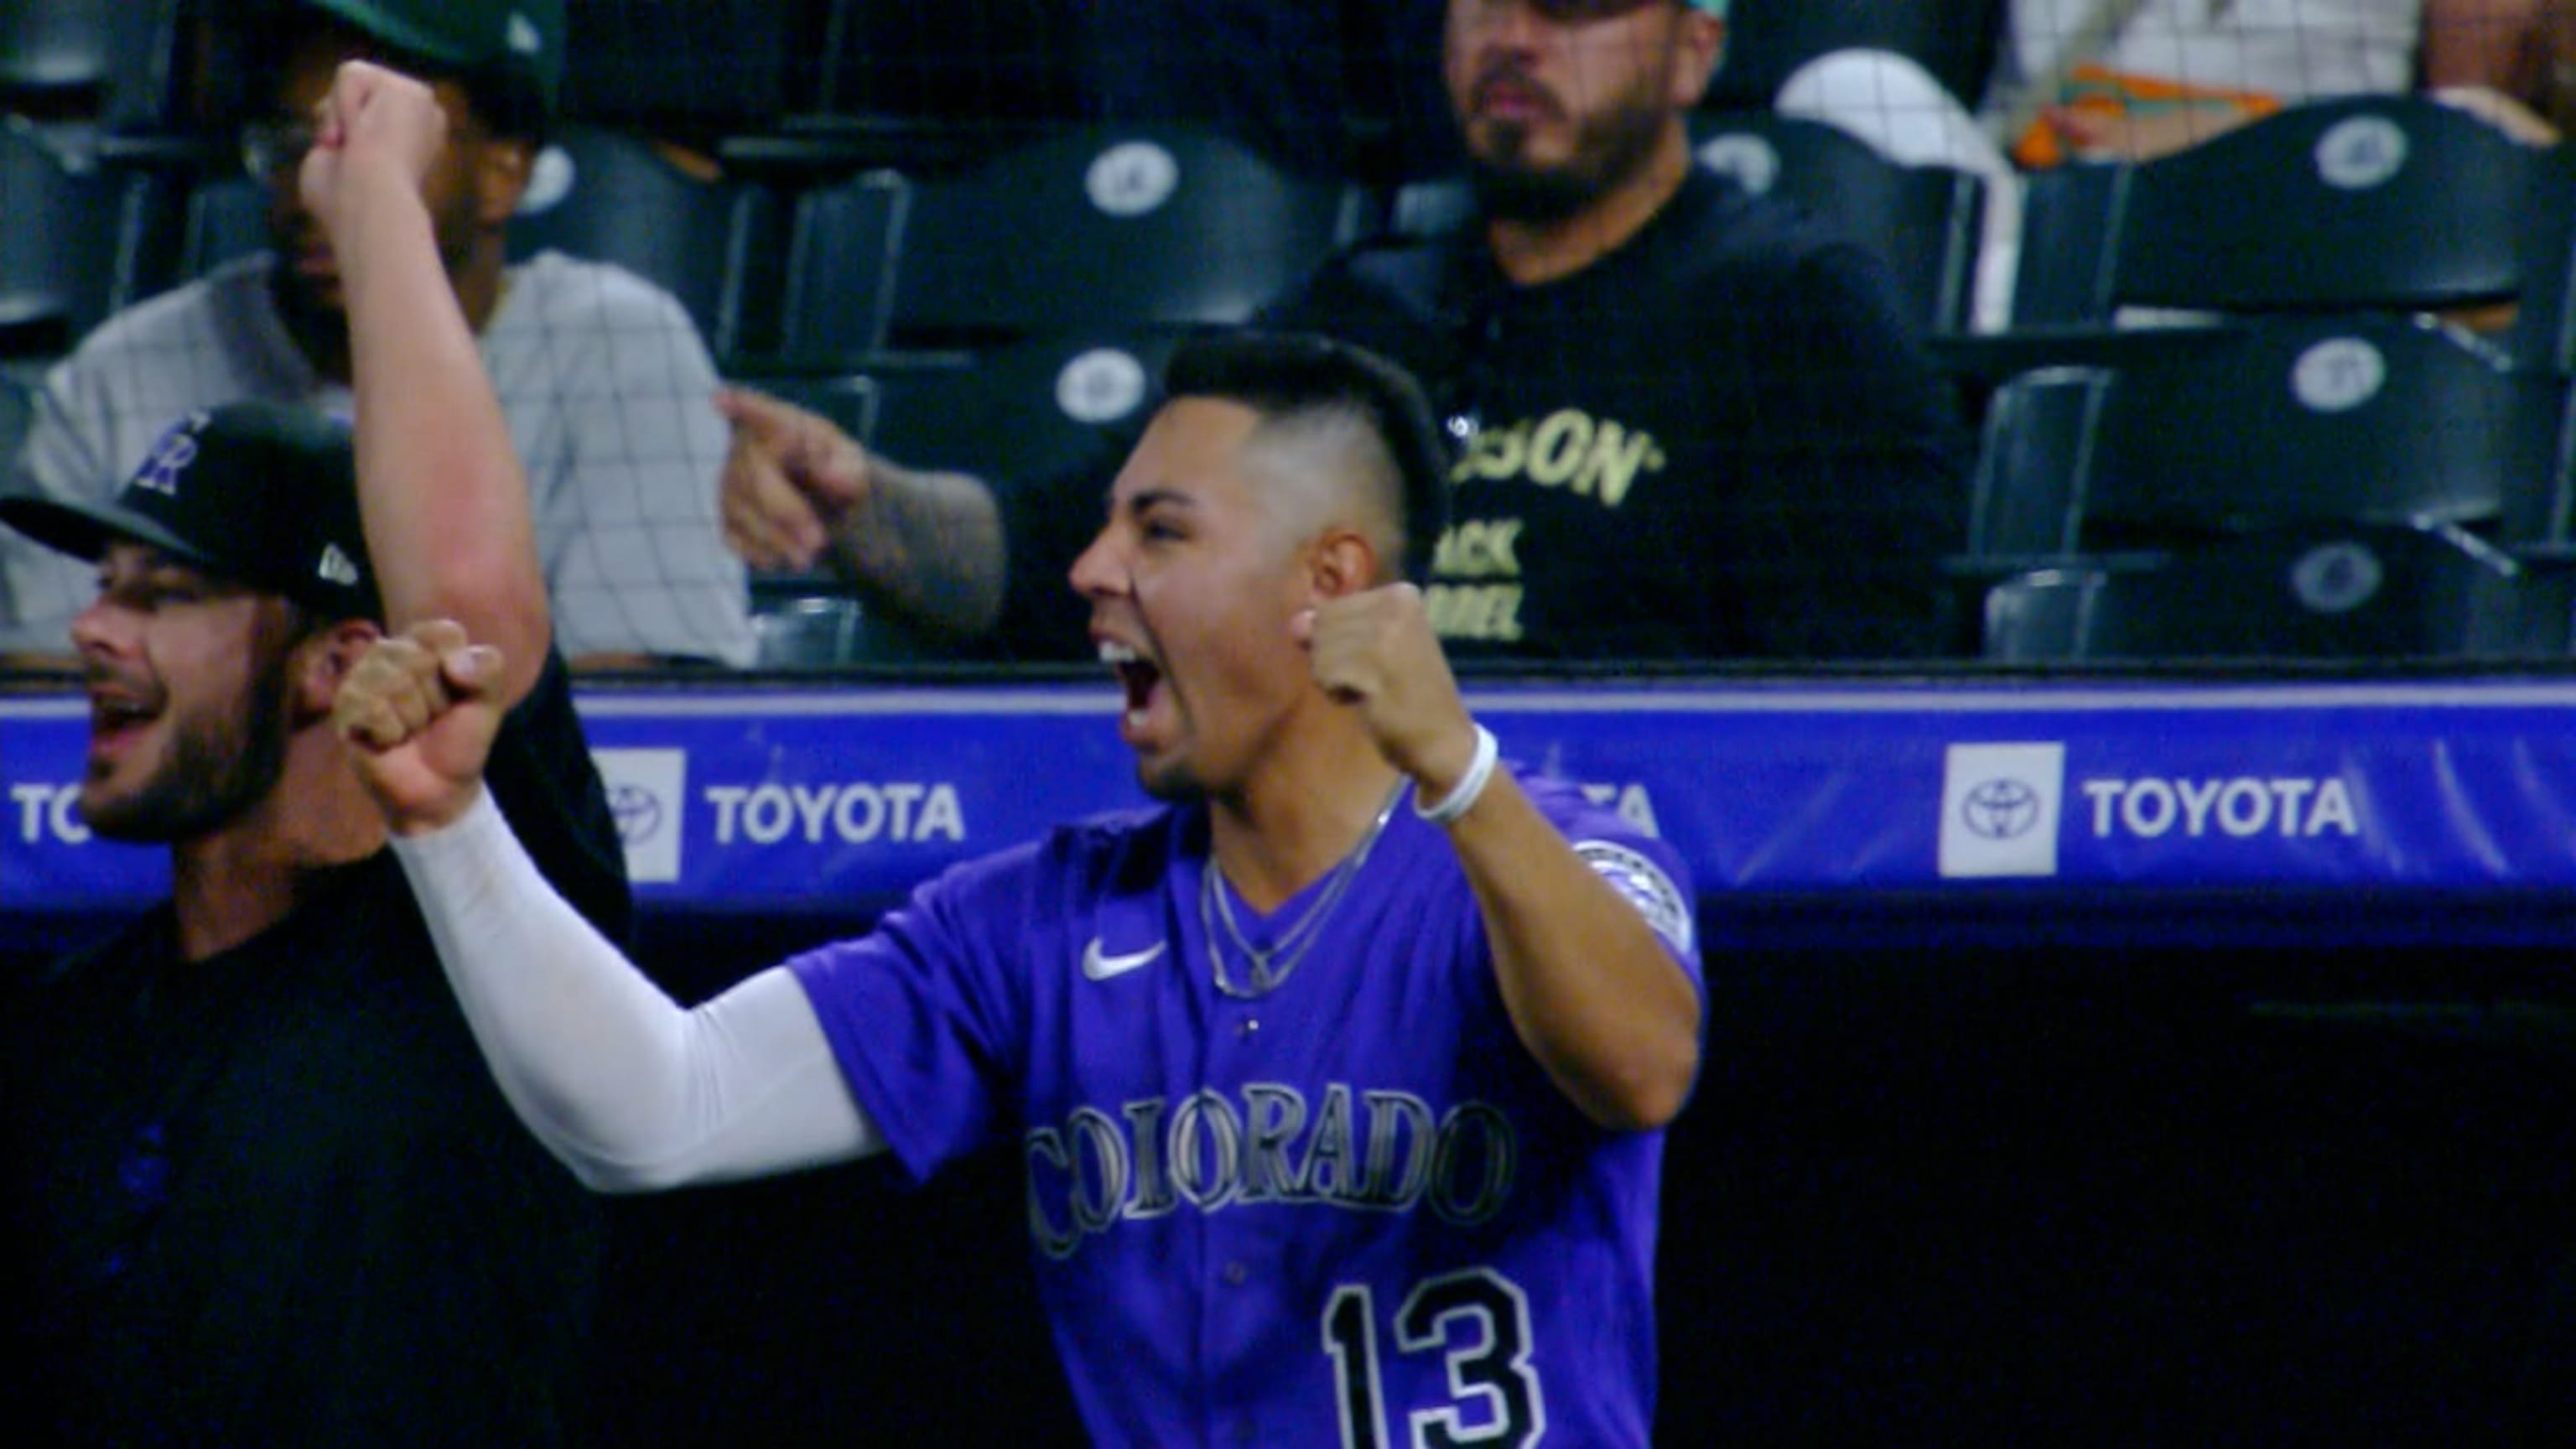 Randal Grichuk's sensational catch sets up Rockies' two-game sweep